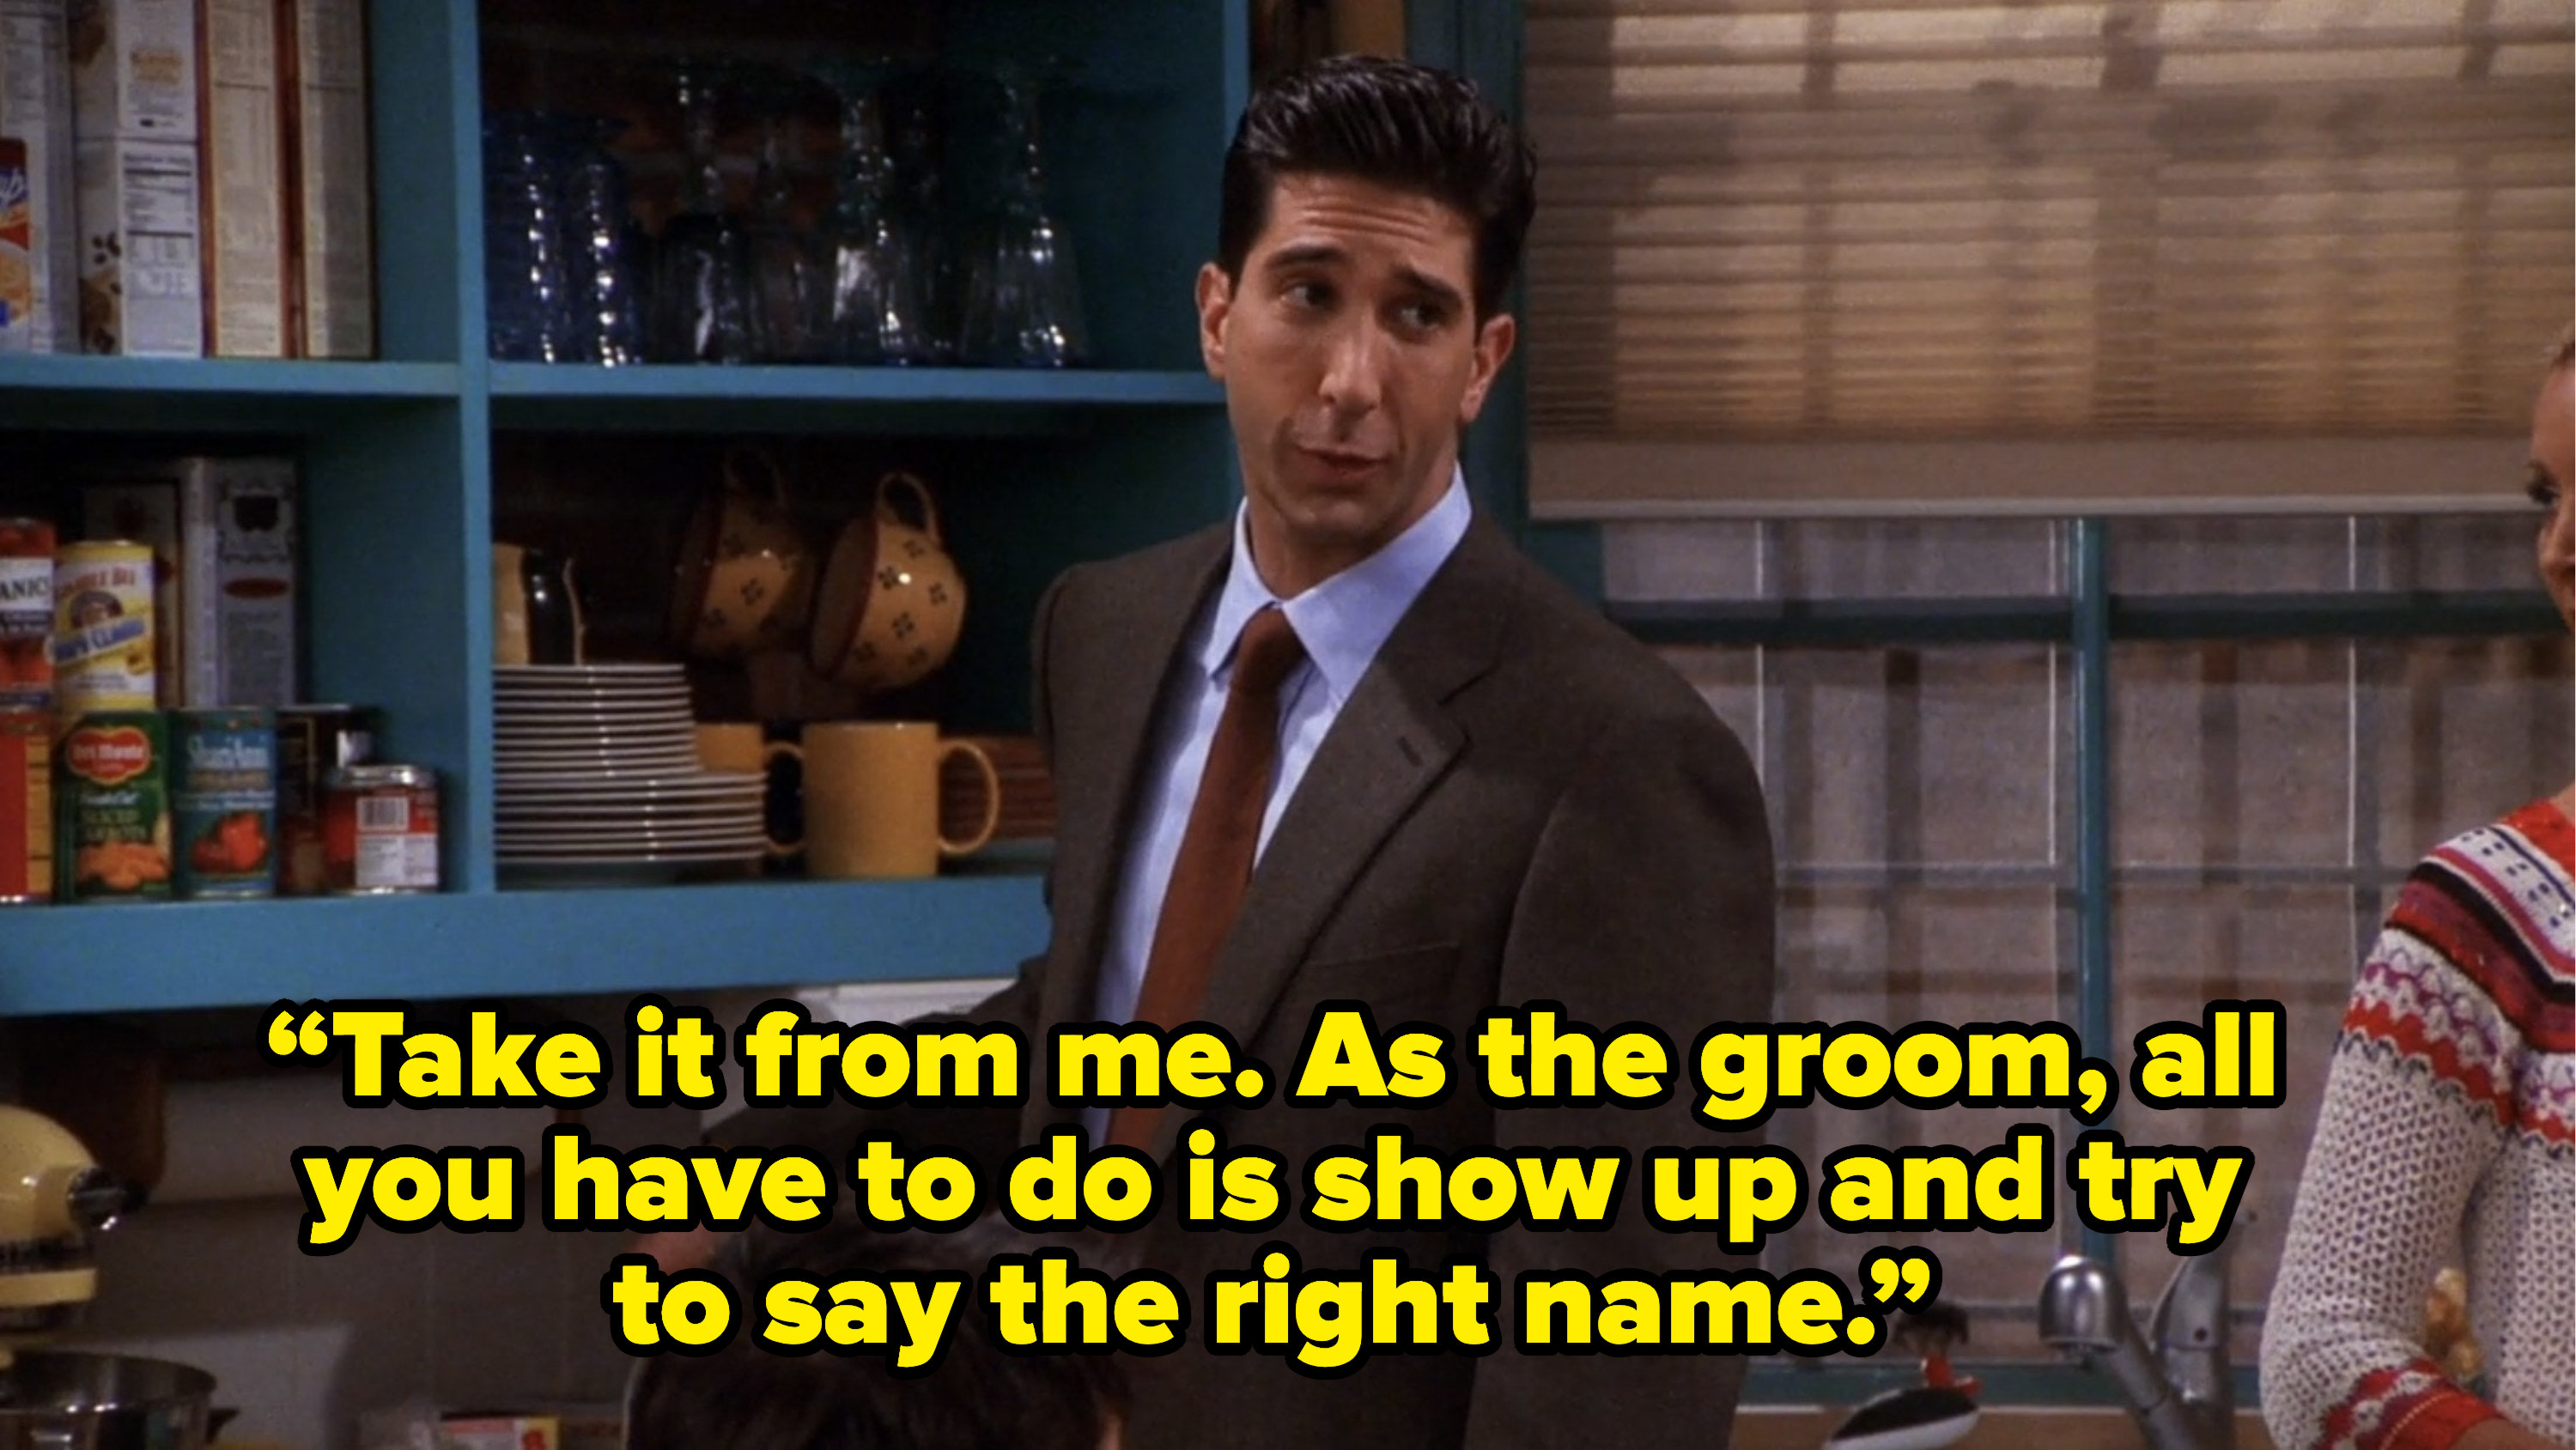 ross telling chandler “Take it from me. As the groom, all you have to do is show up and try to say the right name.” on friends